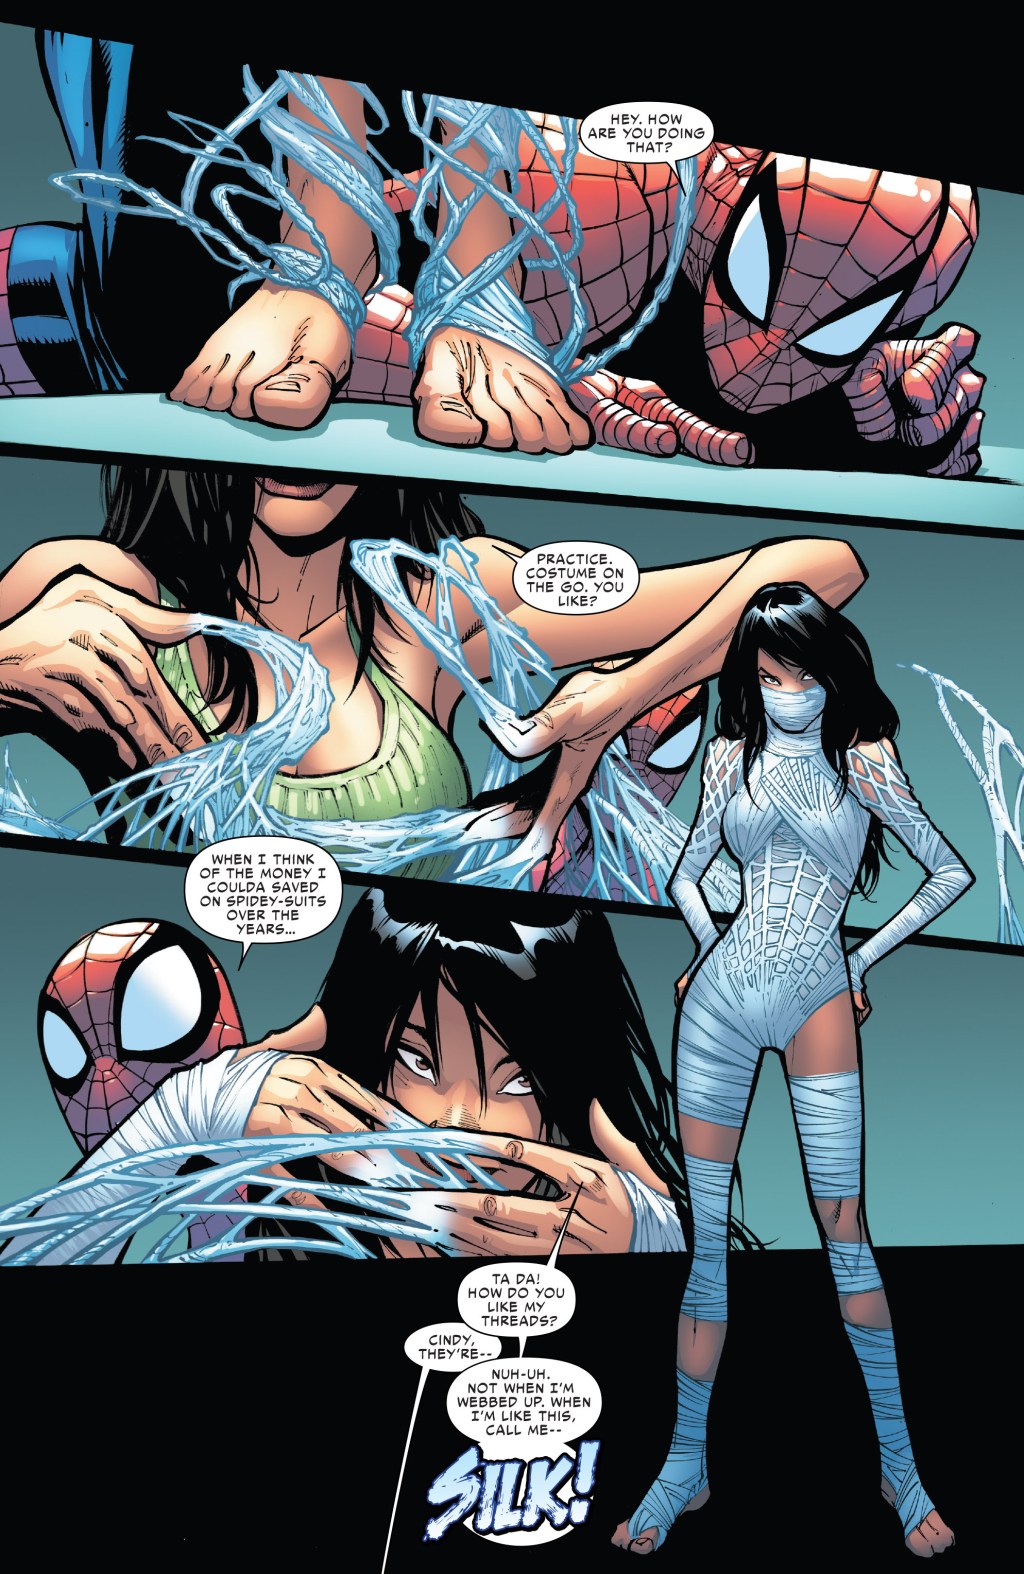 Silk spins her first costume in Amazing Spider-Man Vol. 3 #4 (2014), Marvel Comics. Words by Dan Slott, art by Humberto Ramos, Victor Olazaba, Edgar Delgado, and Chris Eliopoulos.